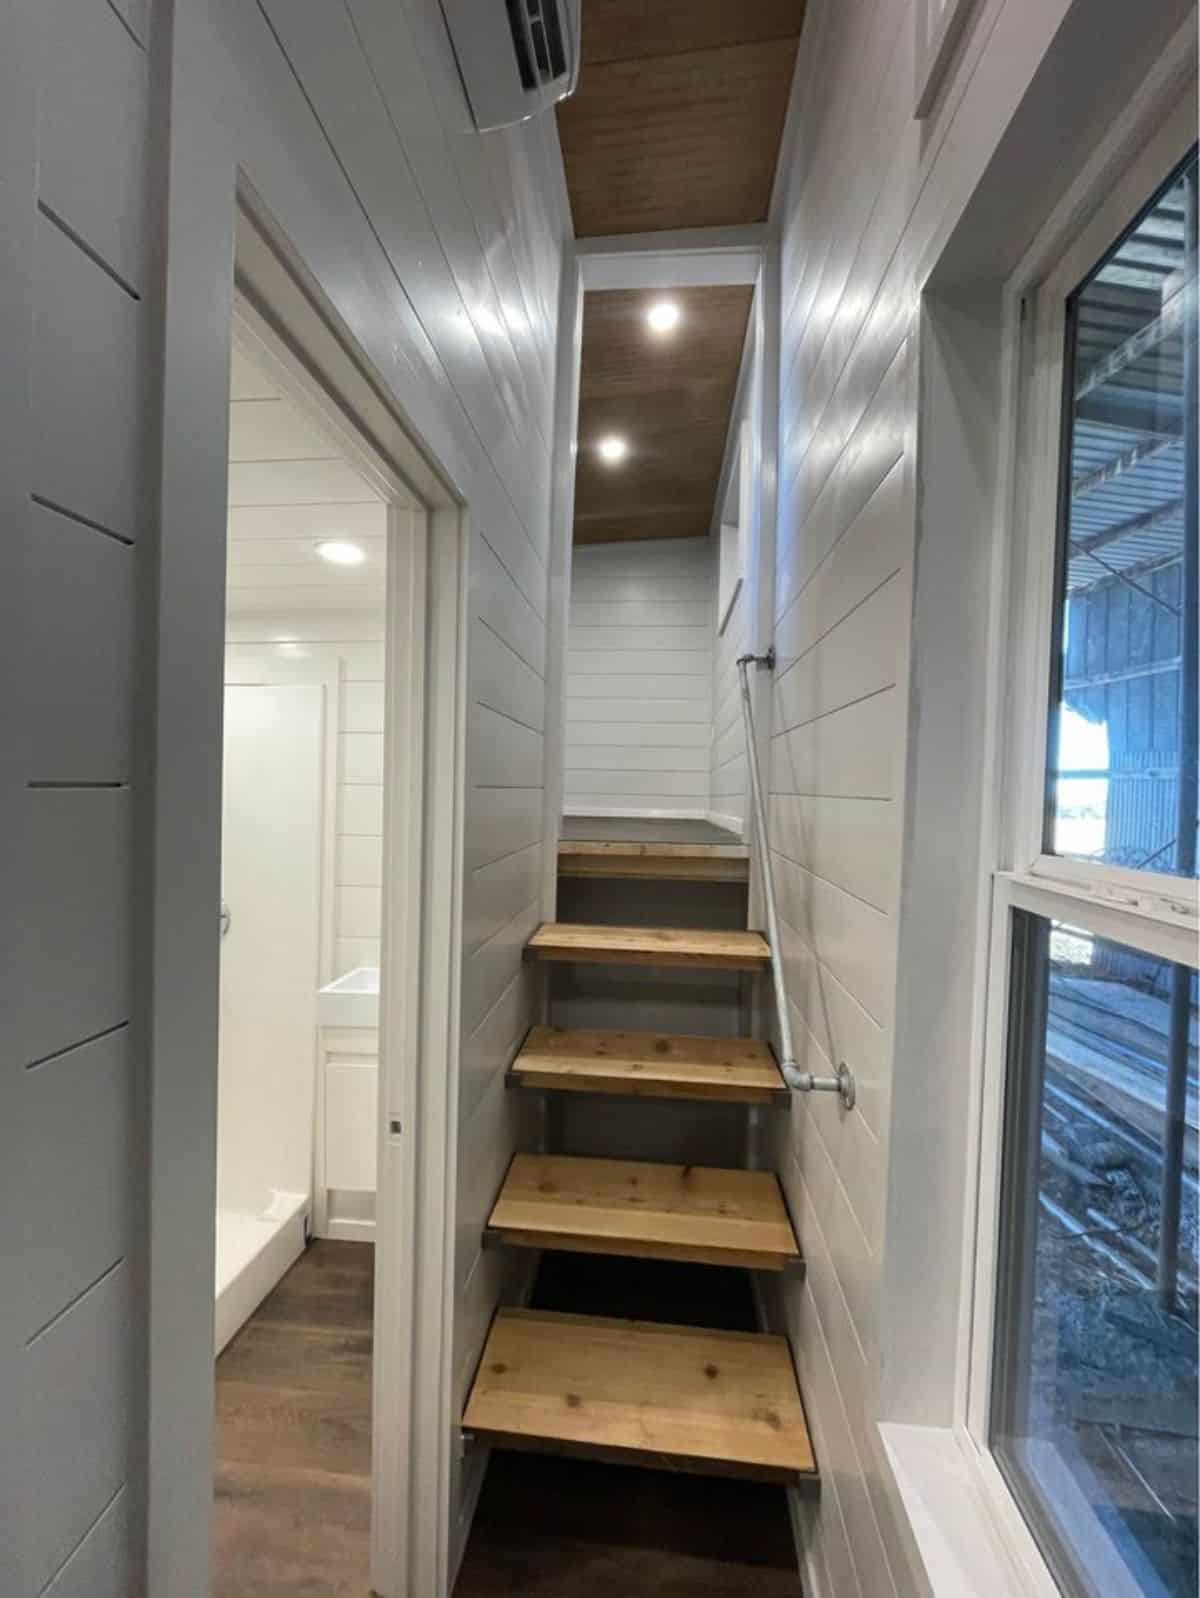 Stairs leading to loft bedroom